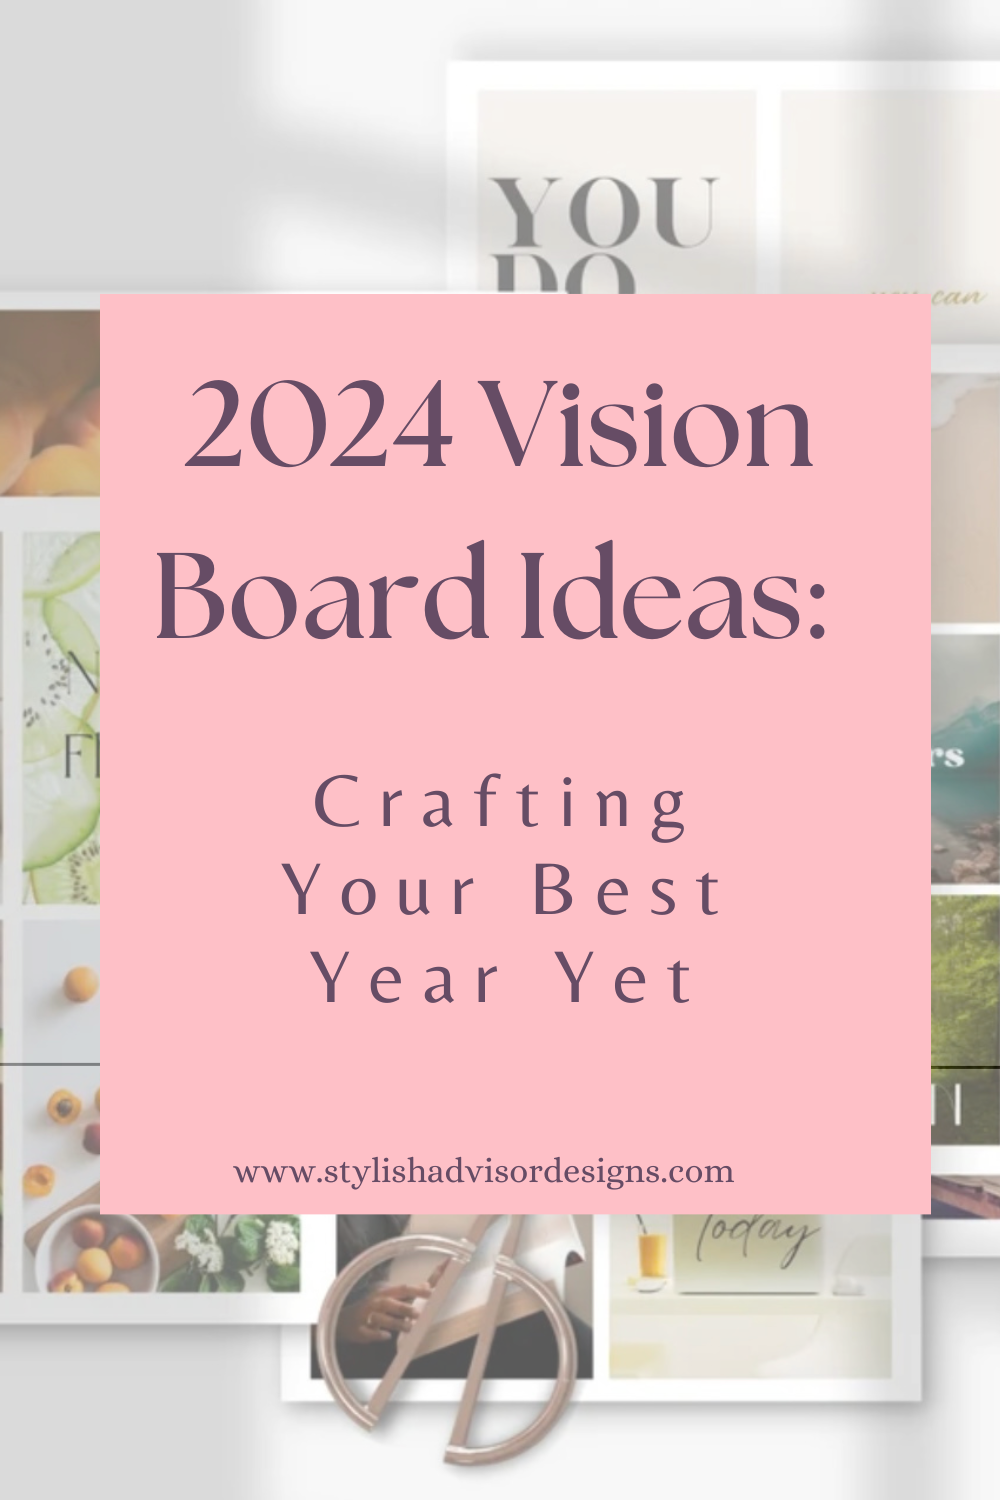 2024 Vision Board Ideas: Crafting Your Best Year Yet